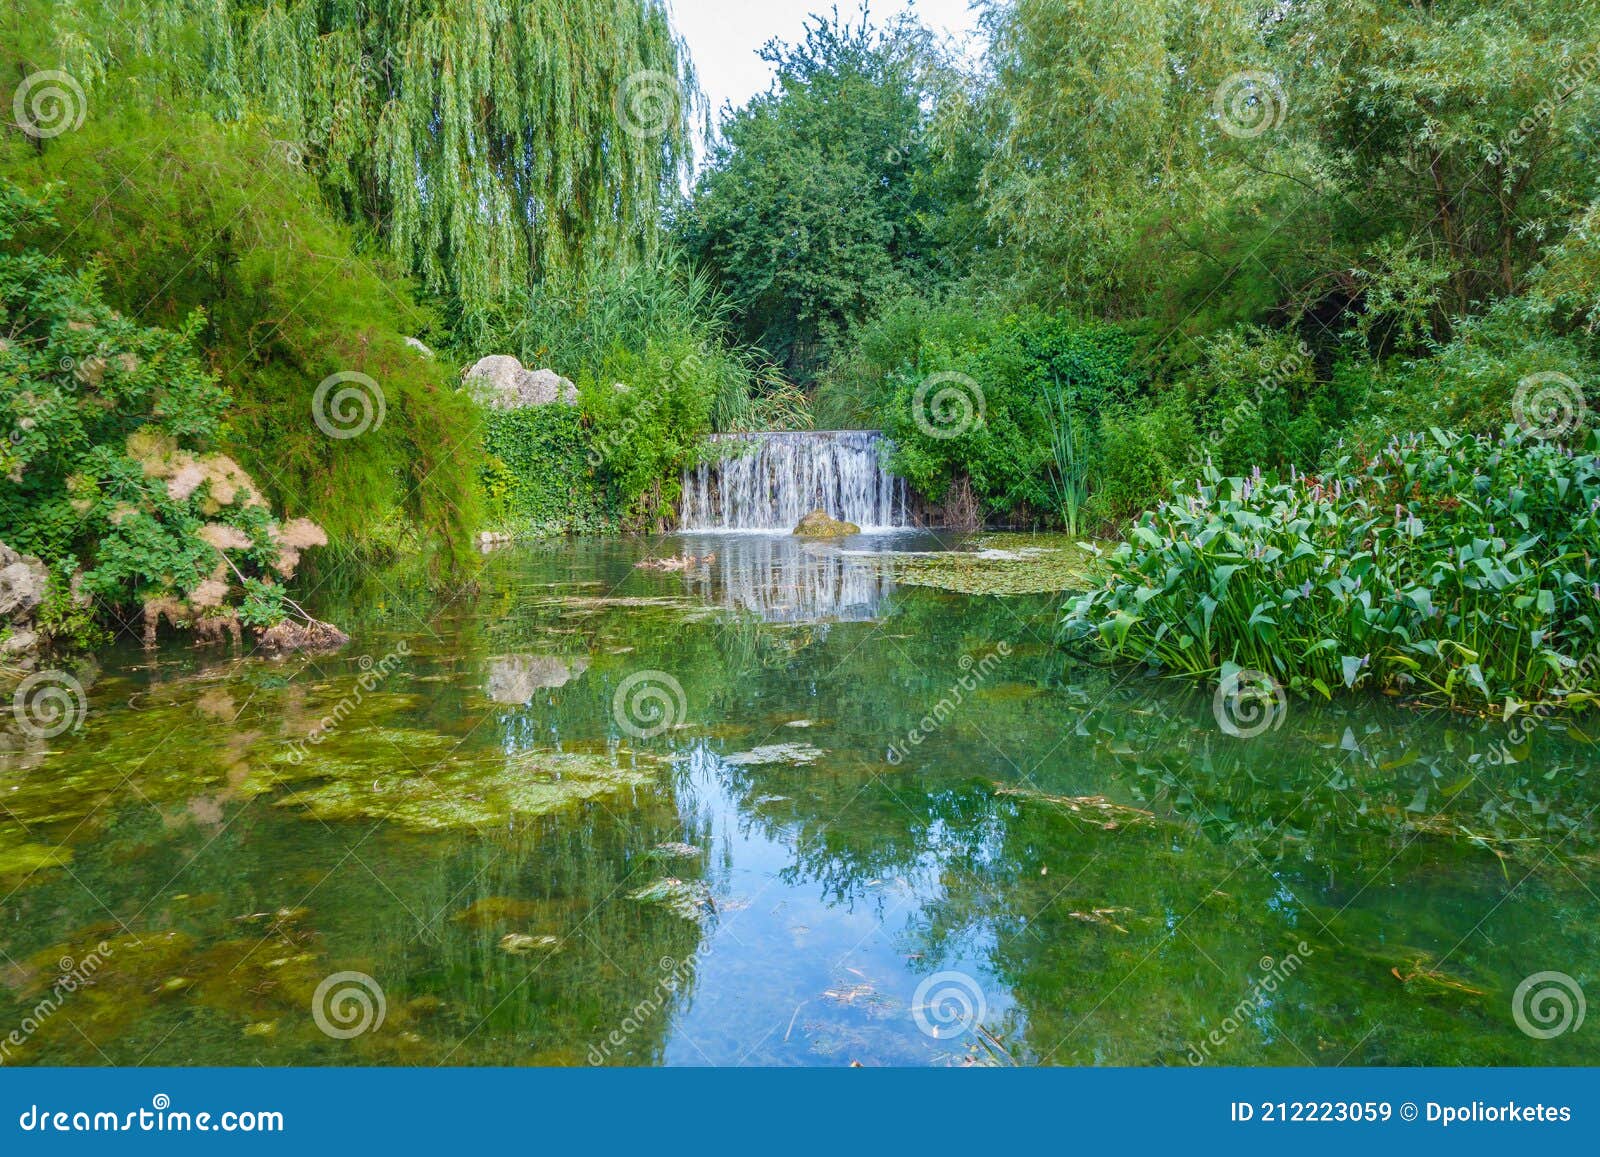 ryste Forfatter Døds kæbe Panoramic Scenic View of Forest Lake with a Waterfall, a Wall of Trees and Aquatic  Plants. Pastoral is Mirrored in Water Stock Image - Image of holiday, pond:  212223059